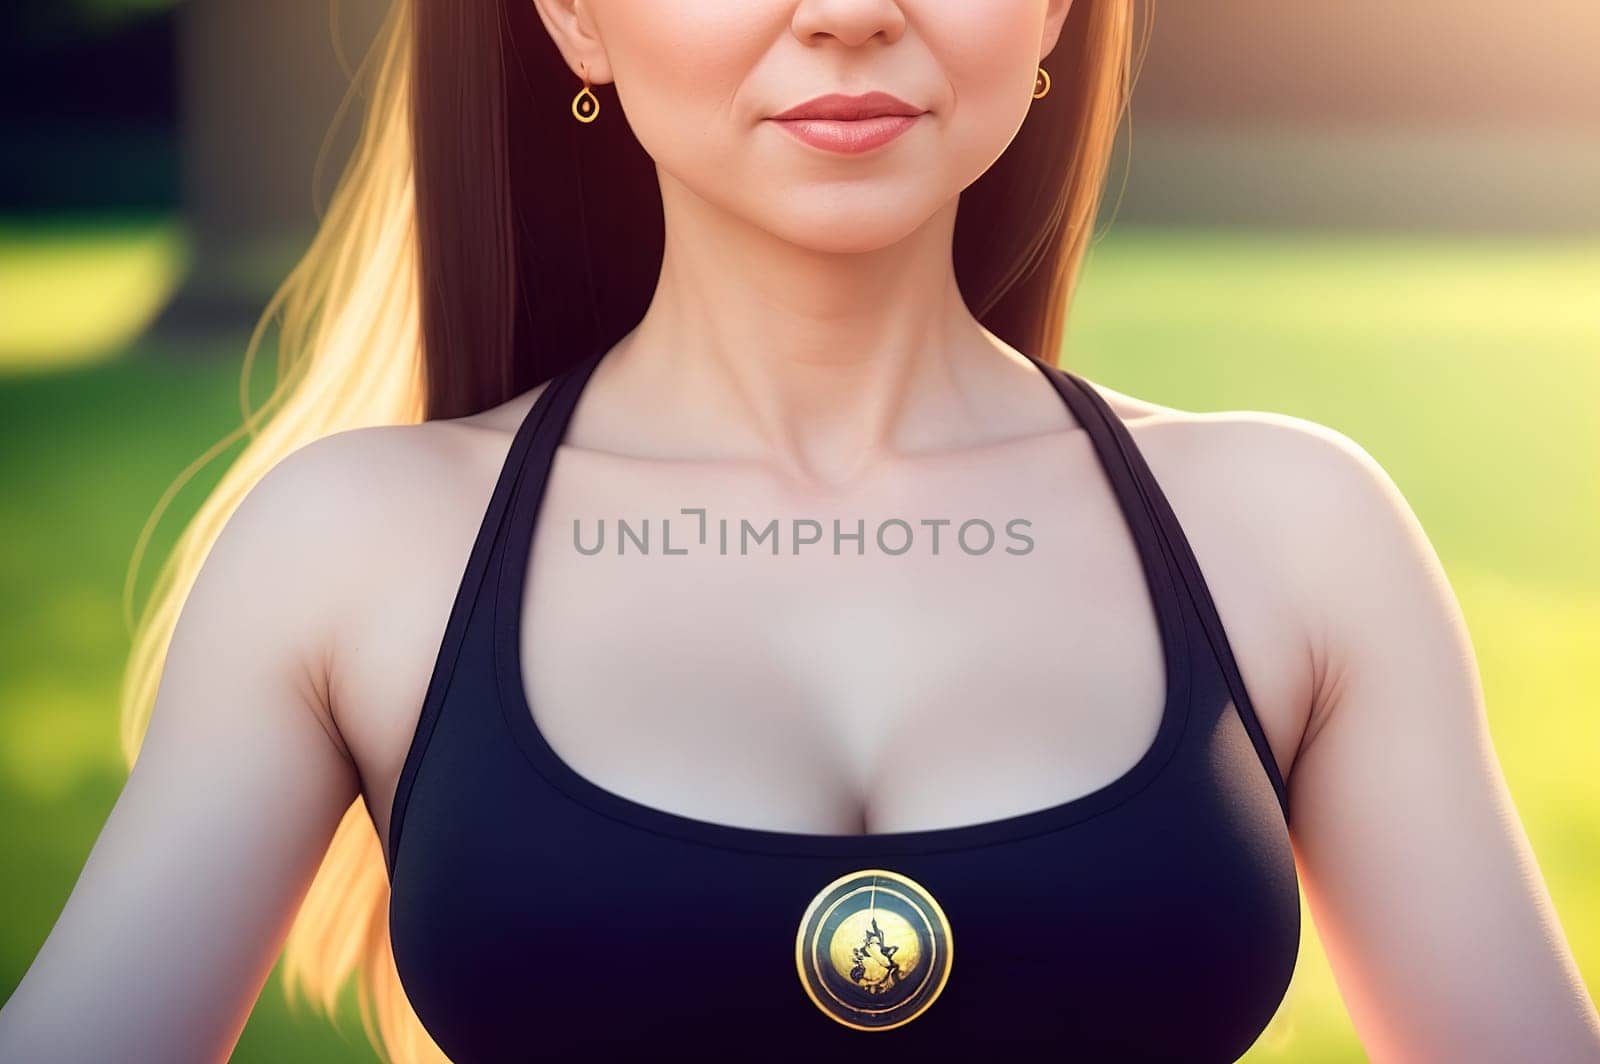 Lady does yoga, sits in the lotus position in Sunny weather by macroarting